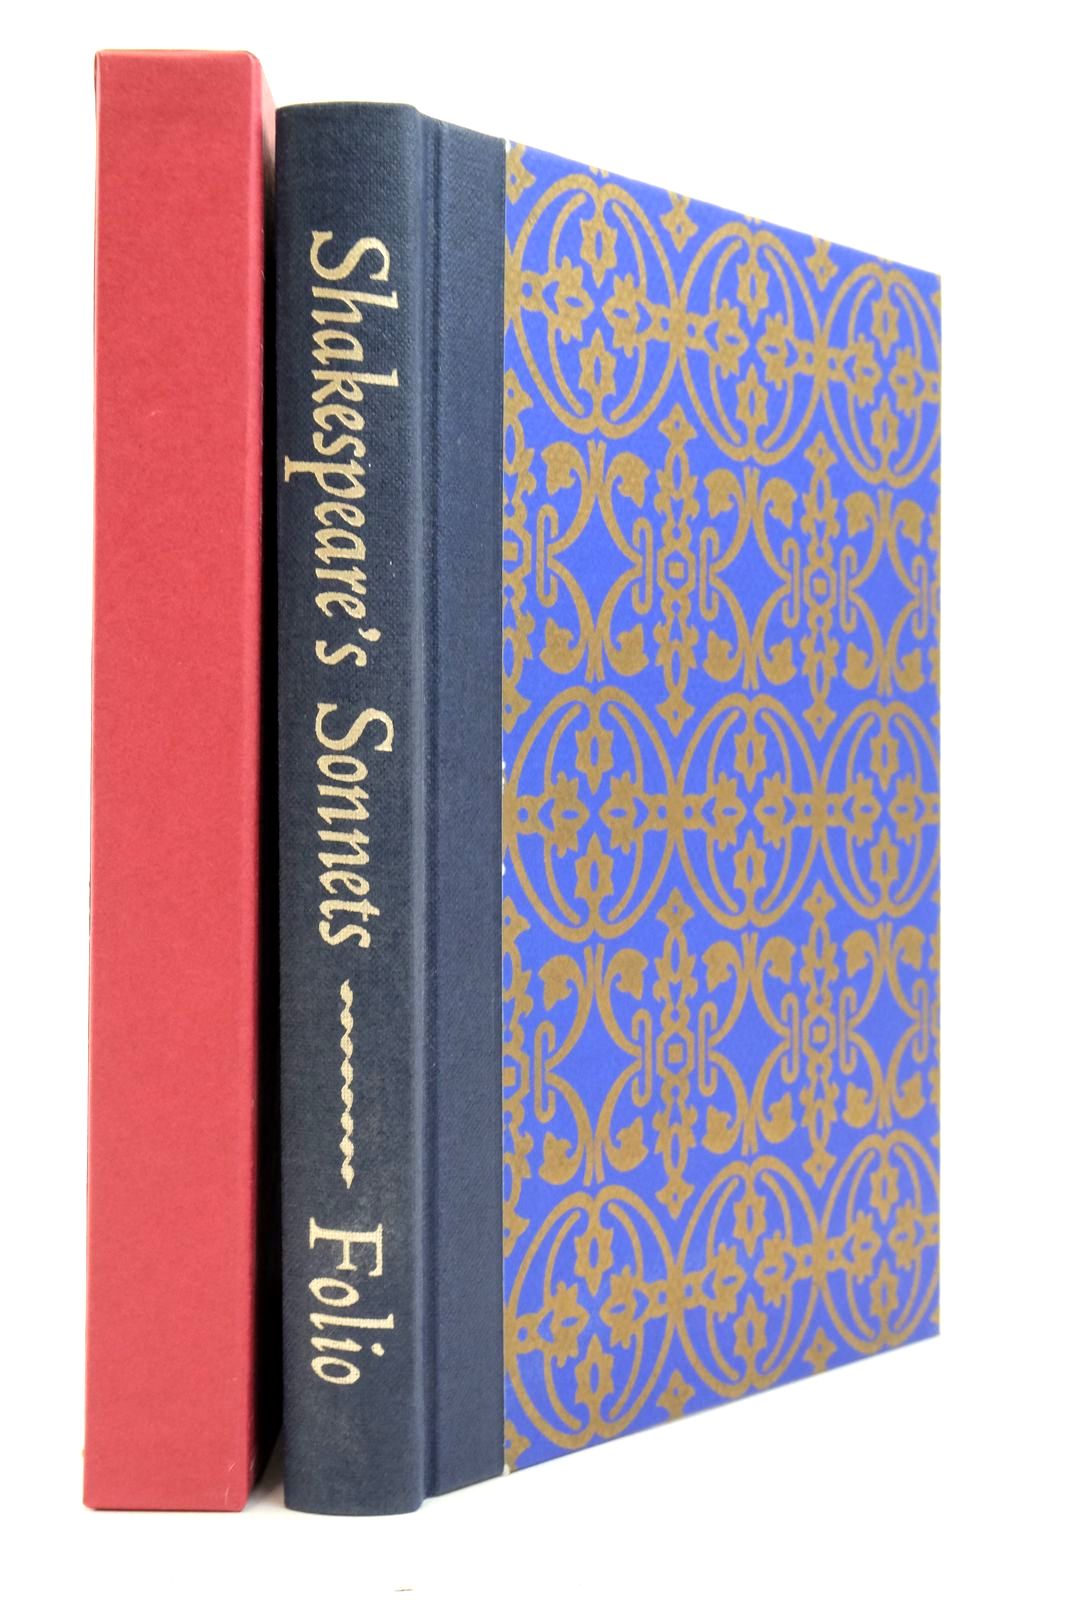 Photo of THE SONNETS AND A LOVER'S COMPLAINT written by Shakespeare, William Duncan-Jones, Katherine illustrated by Brett, Simon Reddick, Peter Lydbury, Jane Brockway, Harry Forster, Peter Tute, George Renton, Michael published by Folio Society (STOCK CODE: 2138180)  for sale by Stella & Rose's Books